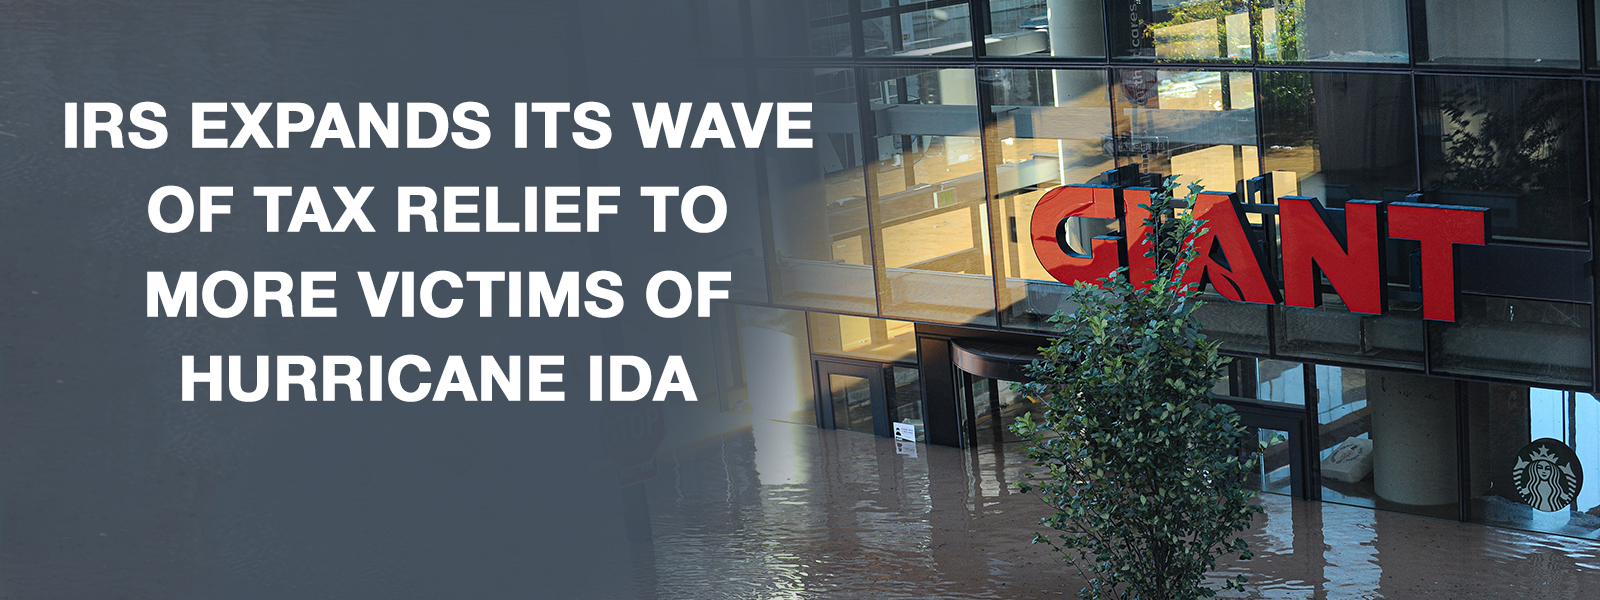 IRS Expands Its Wave Of Tax Relief To More Victims Of Hurricane Ida